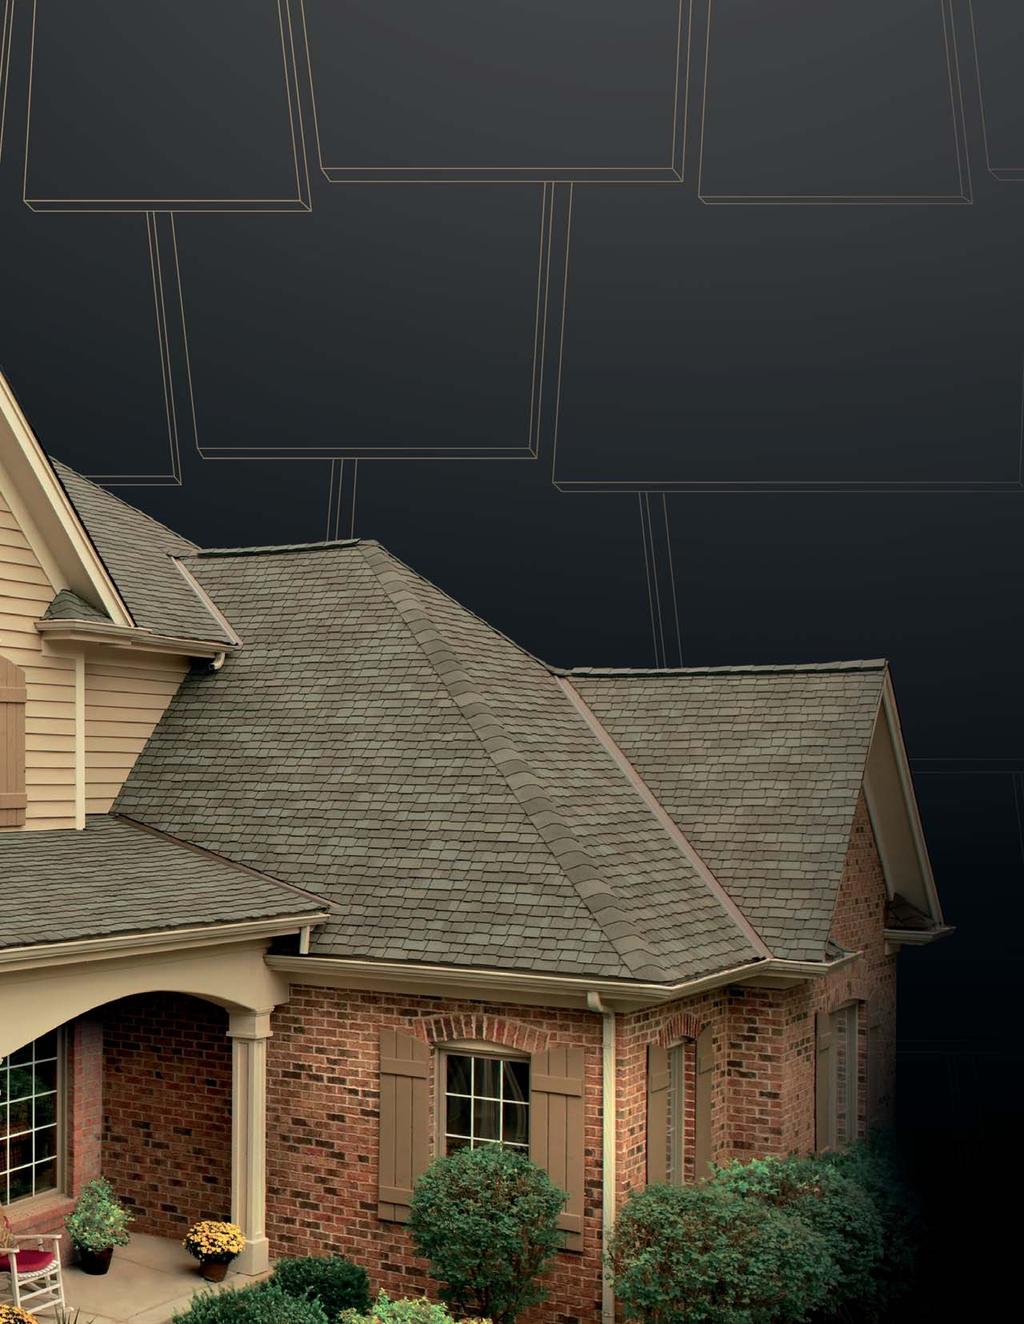 With the unparalleled look of genuine hand-cut wood shakes, Glenwood Shingles provide both charm and rugged beauty.